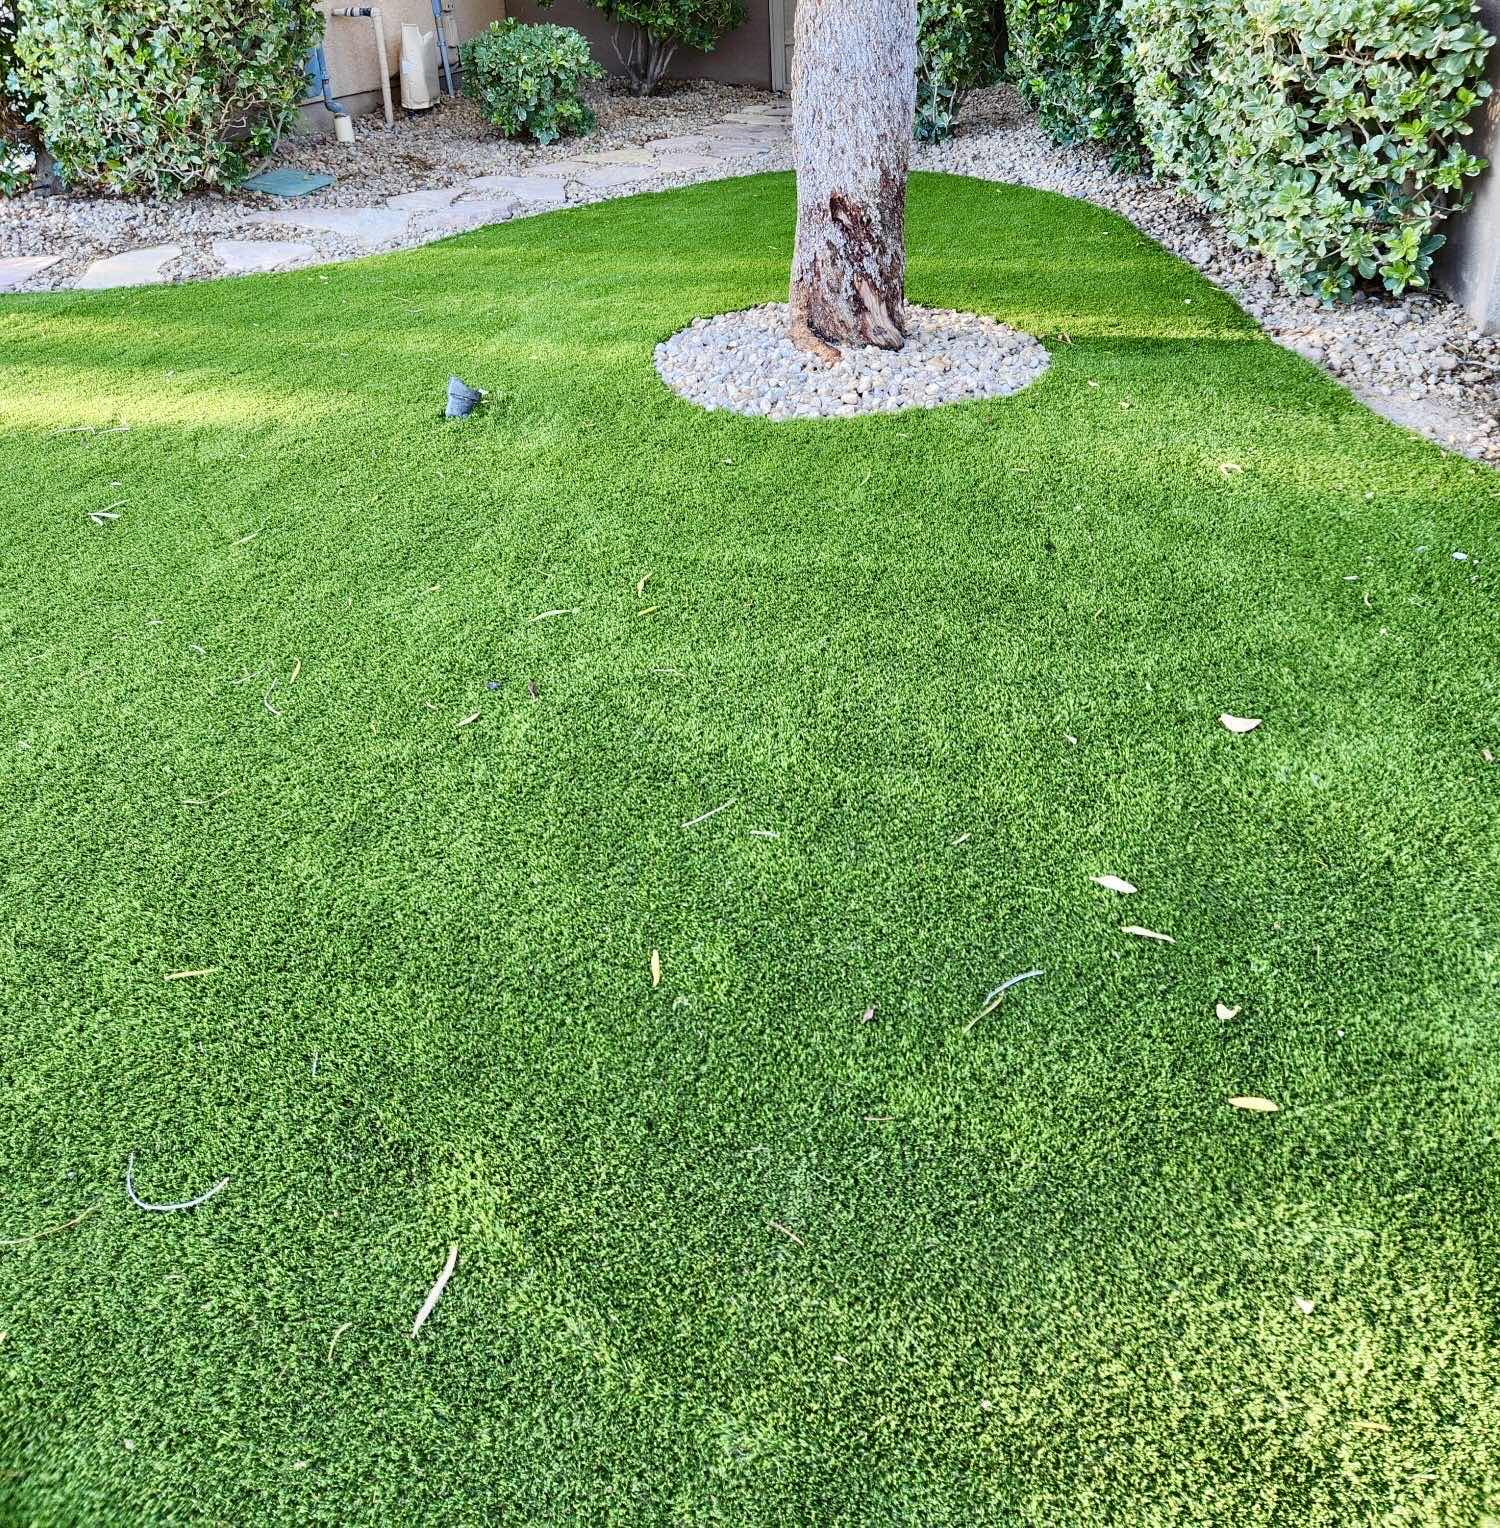 Photo 2 of SUPREME PREMIUM QUALITY ARTIFICIAL TURF GRASS 15’ X 100’ (1500 TOTAL SQ FT) ANTHEM COUNTRY CLUB APPROVED TOTAL TURF HEIGHT 1.97”- (Pickup Sun June 2nd & Mon June 3rd)